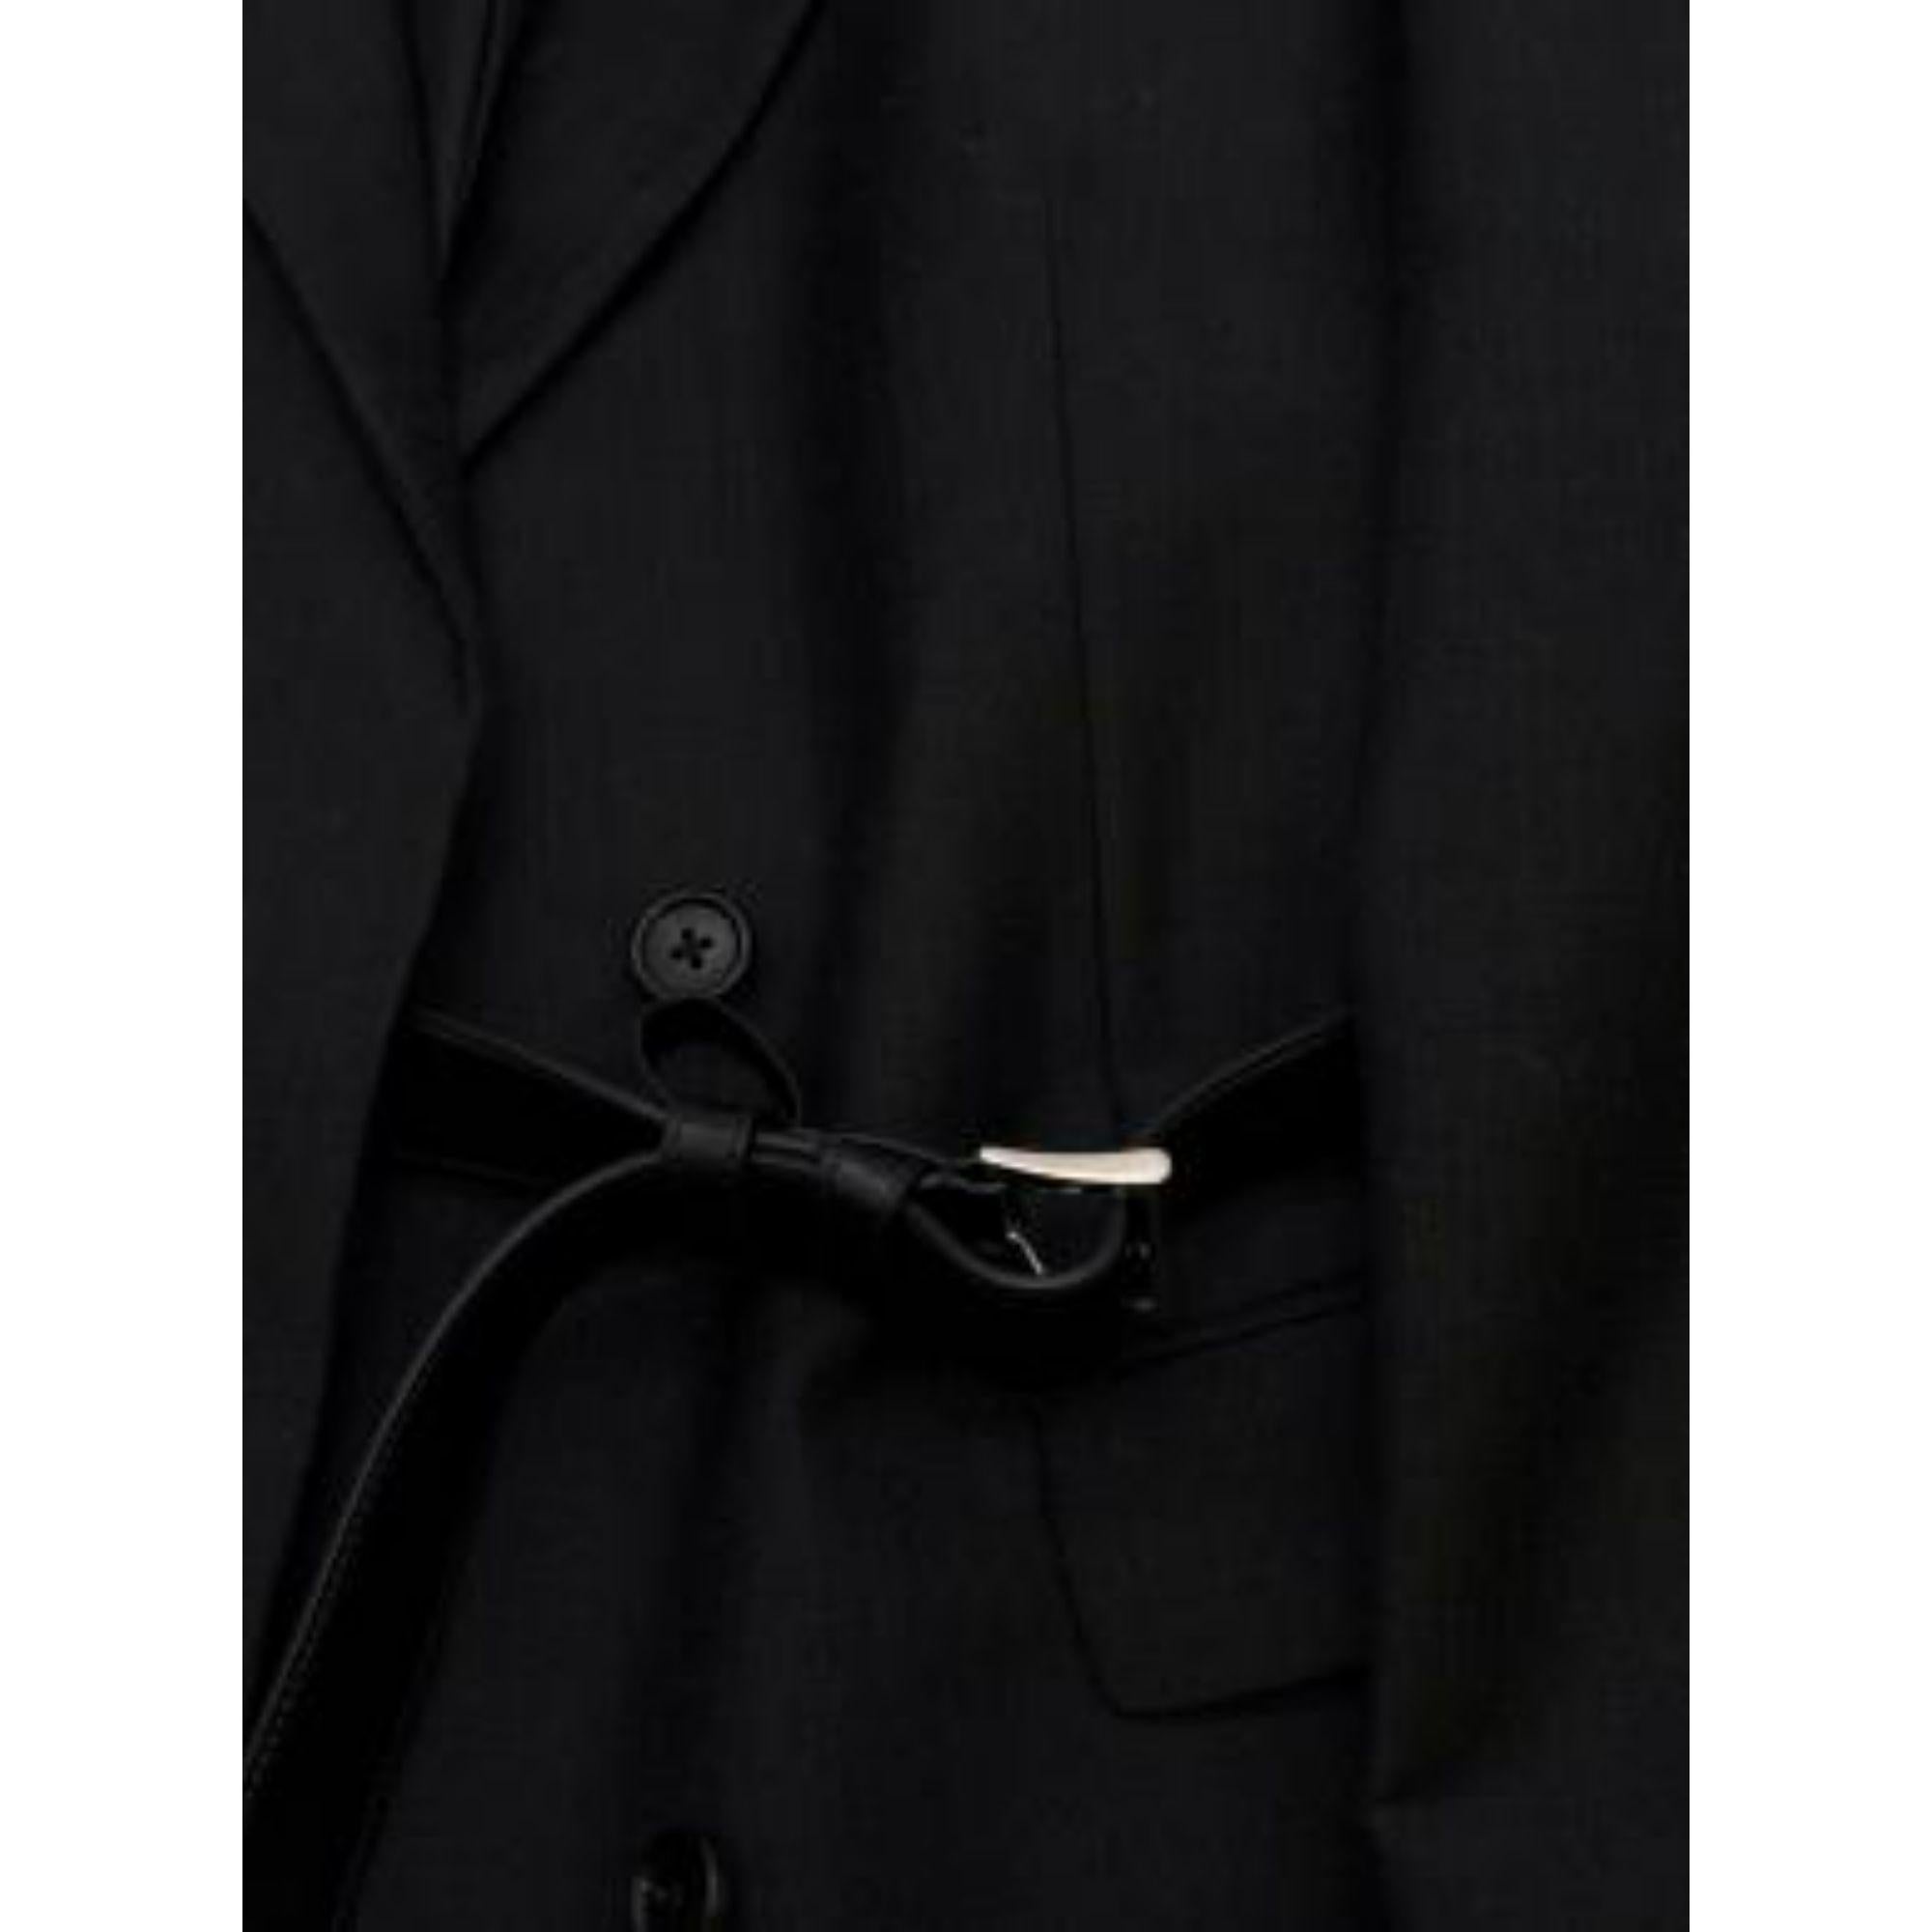 Men's Prada Grey Mohair Wool Buckled Double Breasted Suit For Sale